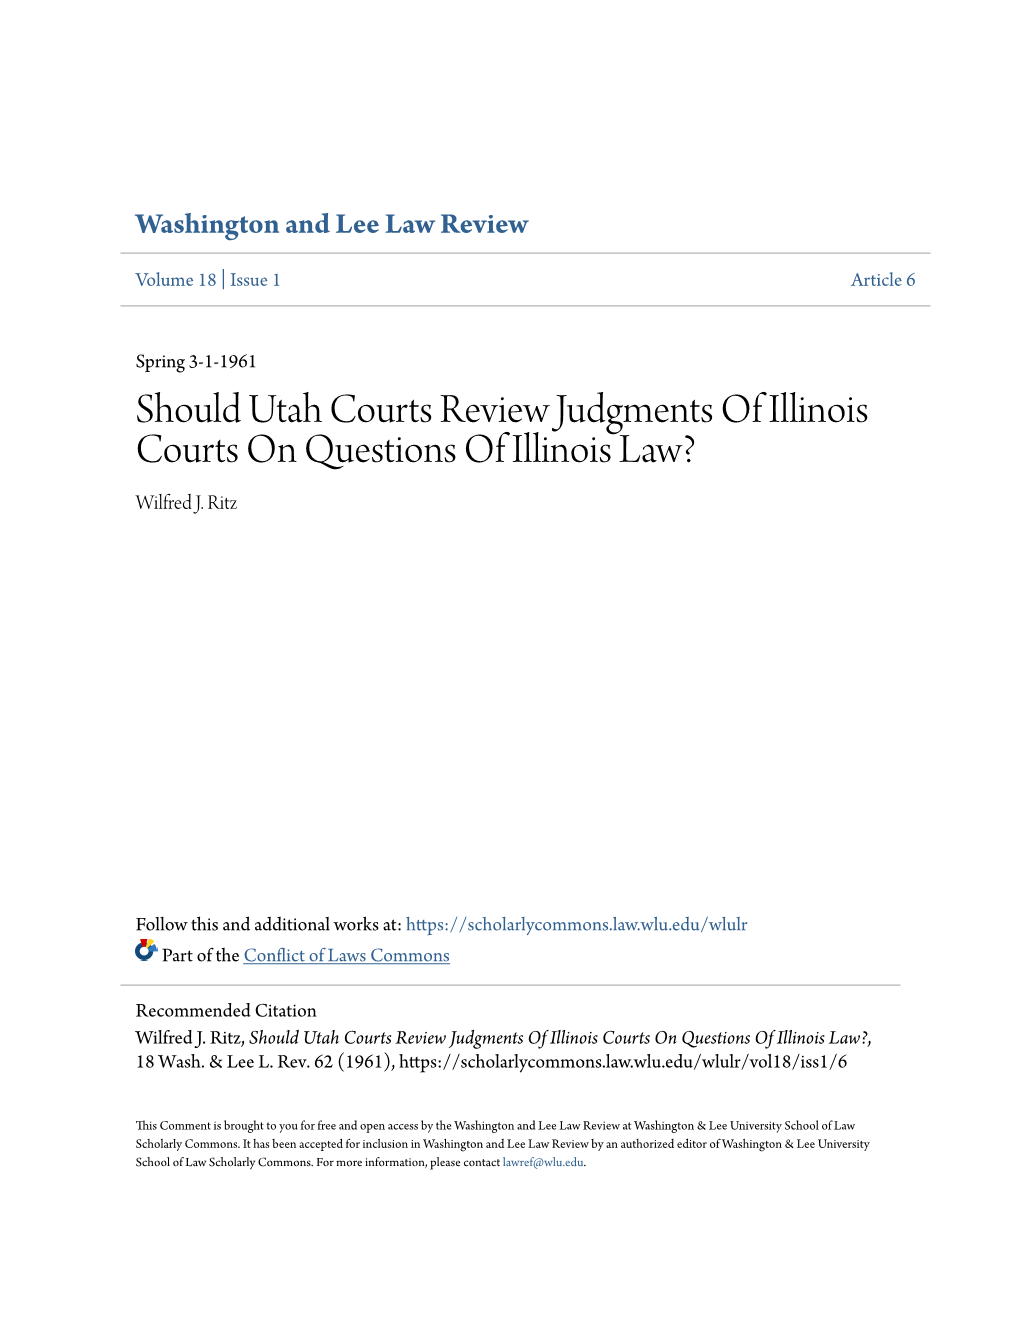 Should Utah Courts Review Judgments of Illinois Courts on Questions of Illinois Law? Wilfred J